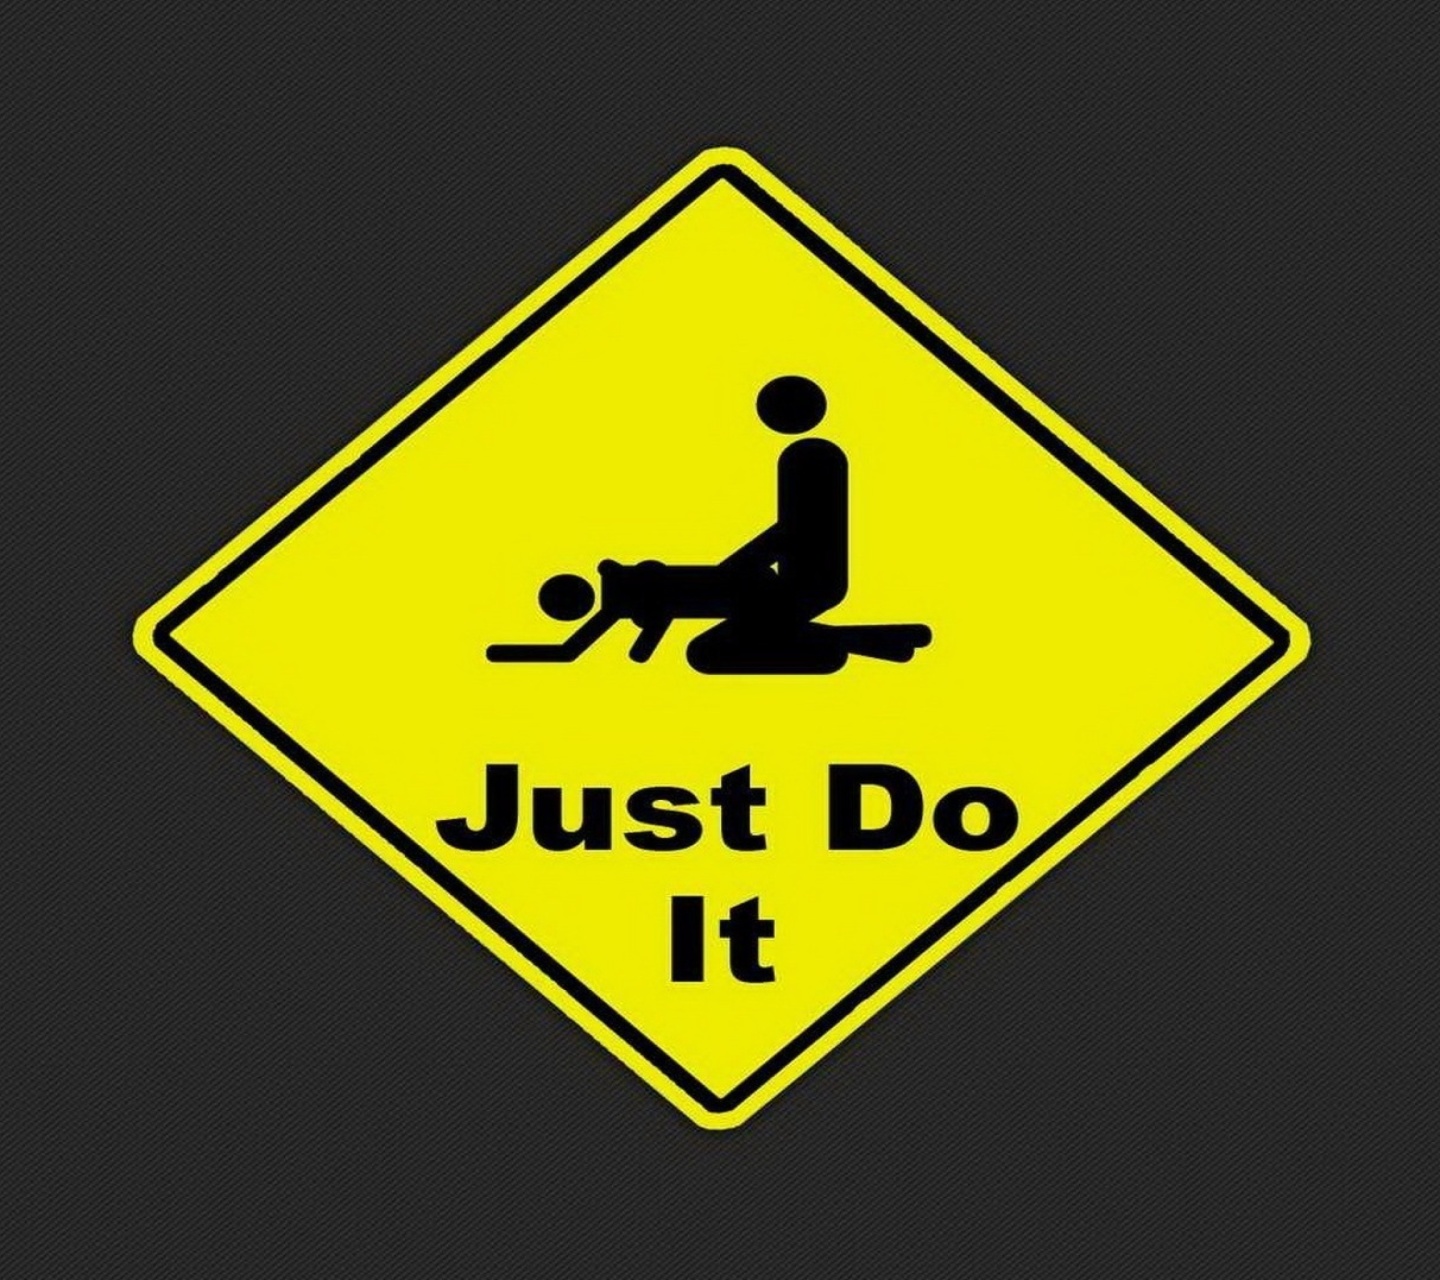 Just Do It Funny Sign wallpaper 1440x1280